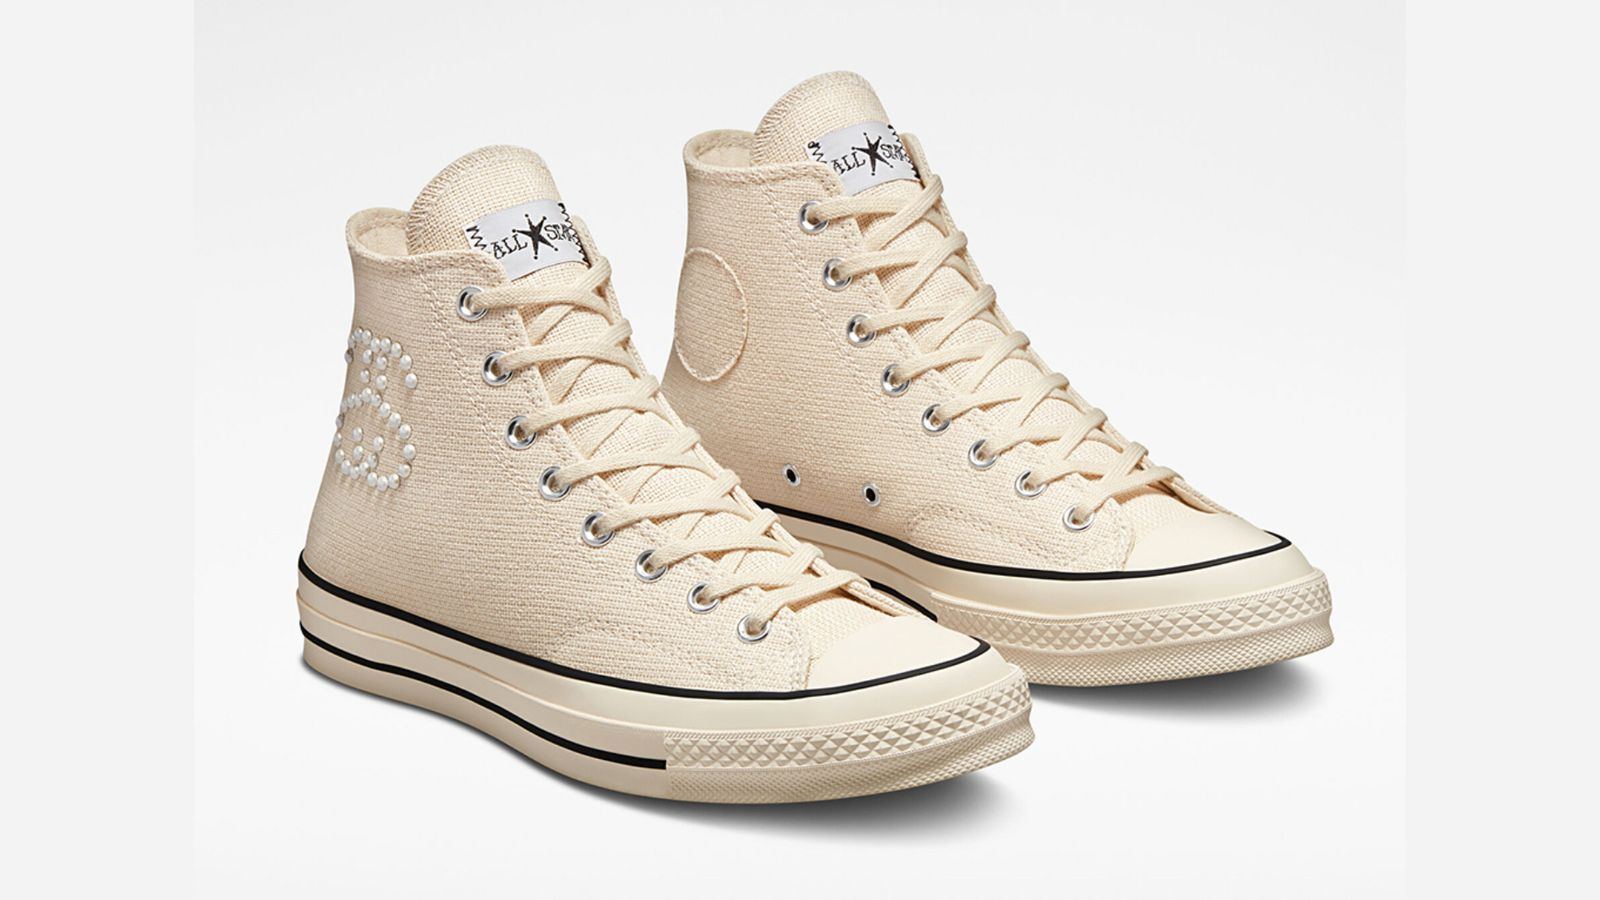 Stüssy x Converse Chuck 70 Hi "Fossil Pearl" product image of a fossil white Converse high-top featuring the Stüssy logo on the side made from white pearls.